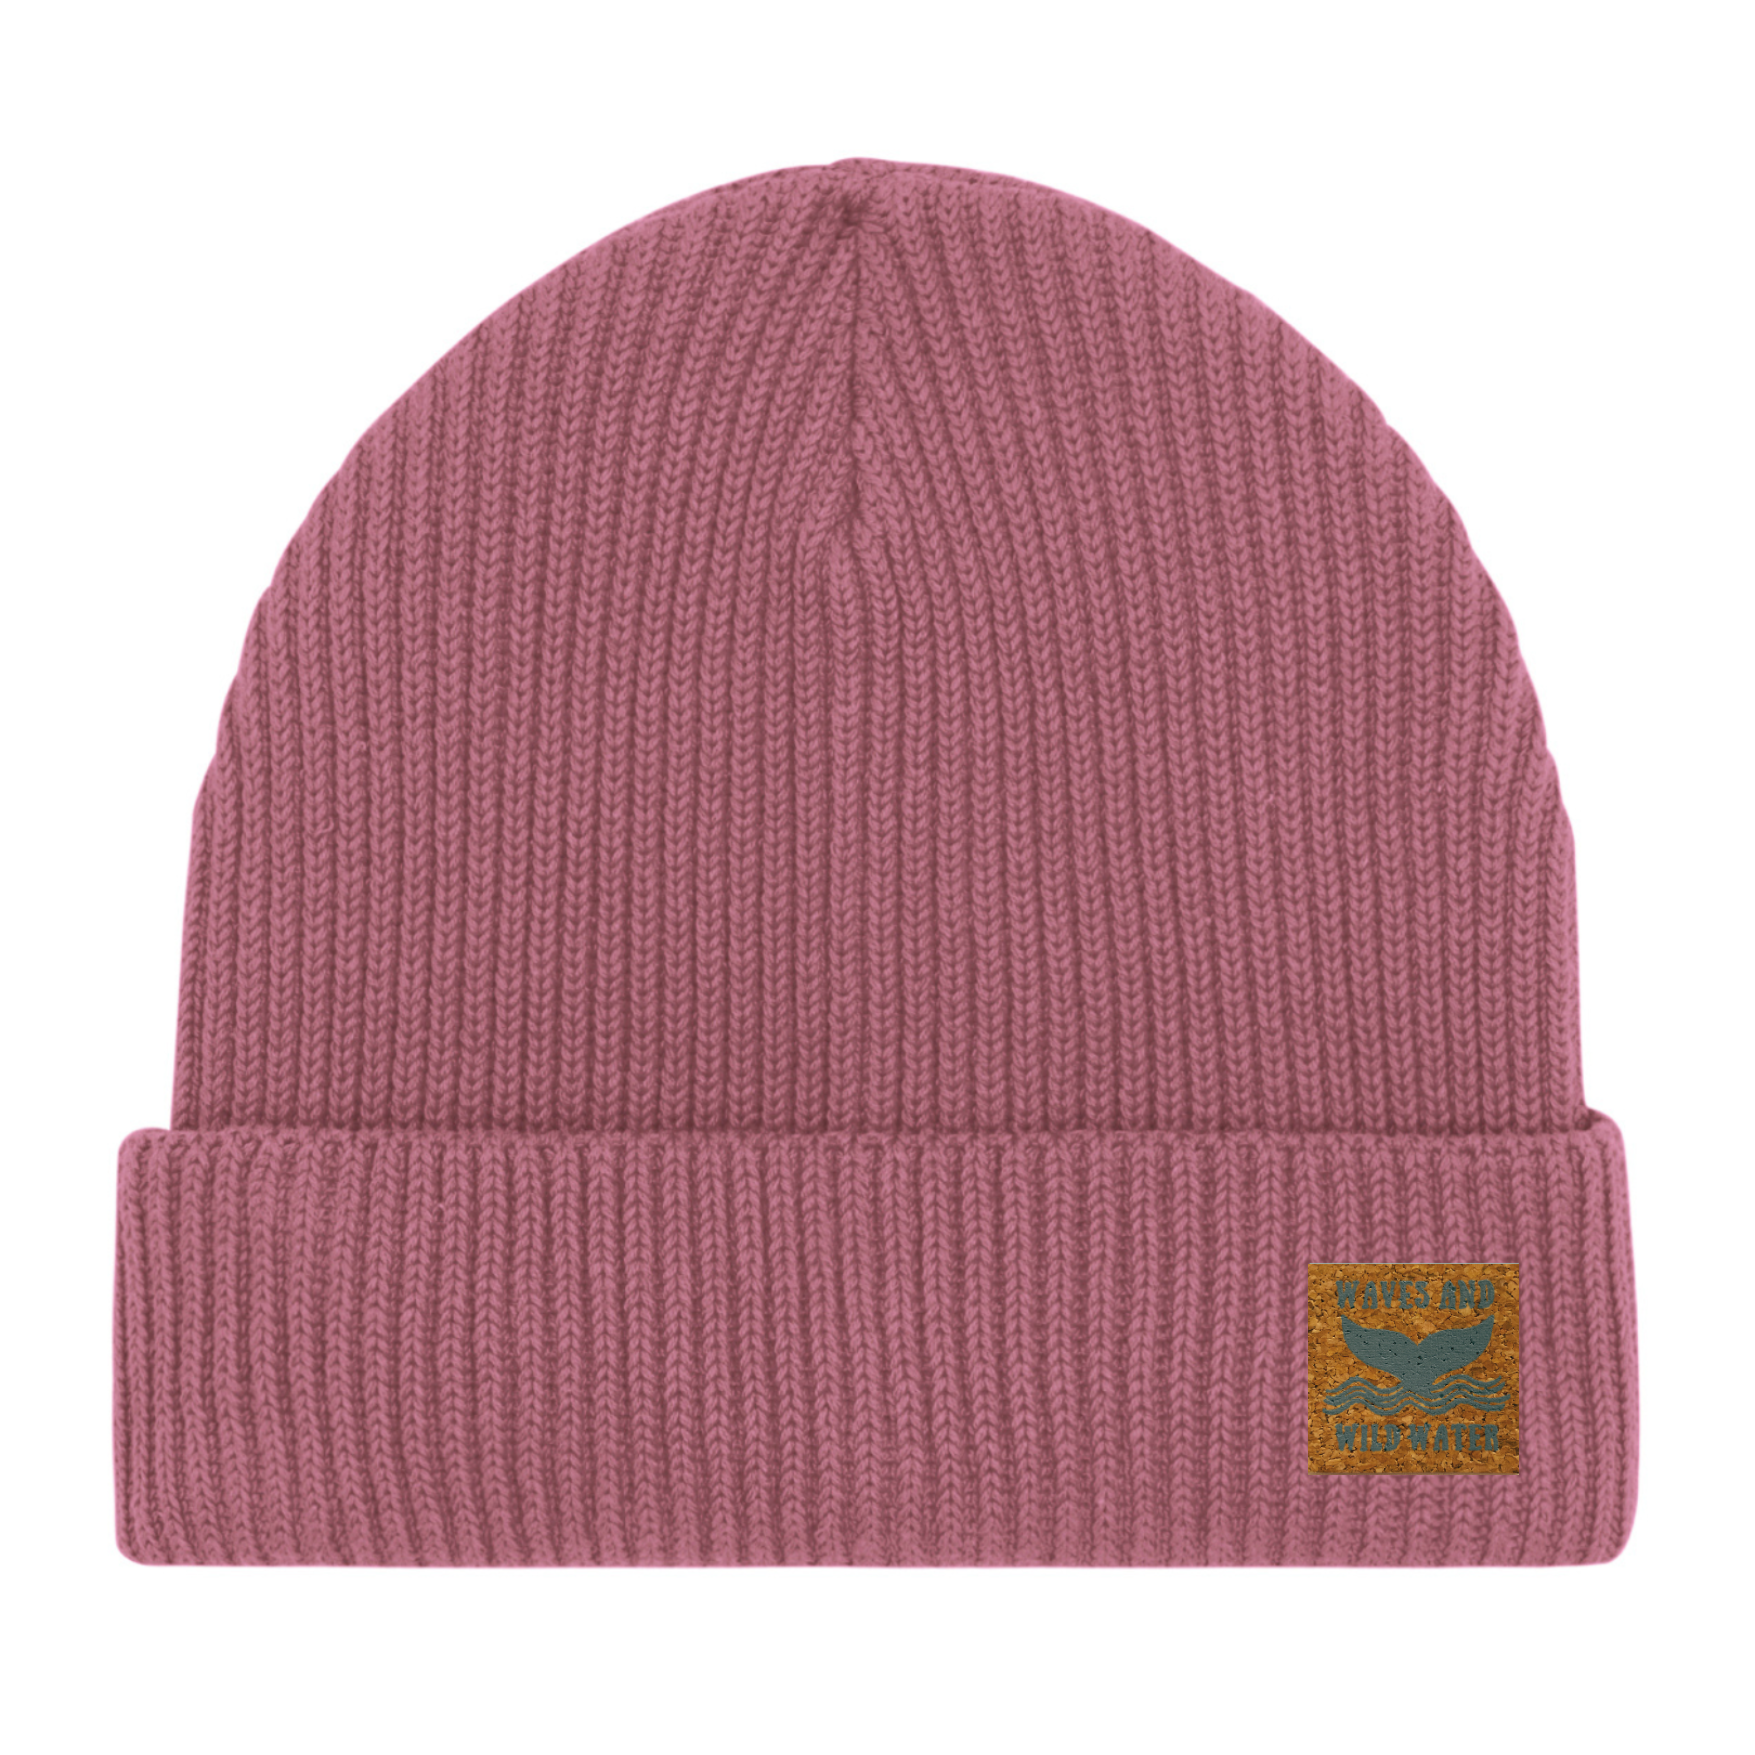 A blush pink fisherman beanie hat with a Waves & Wild Water label. 